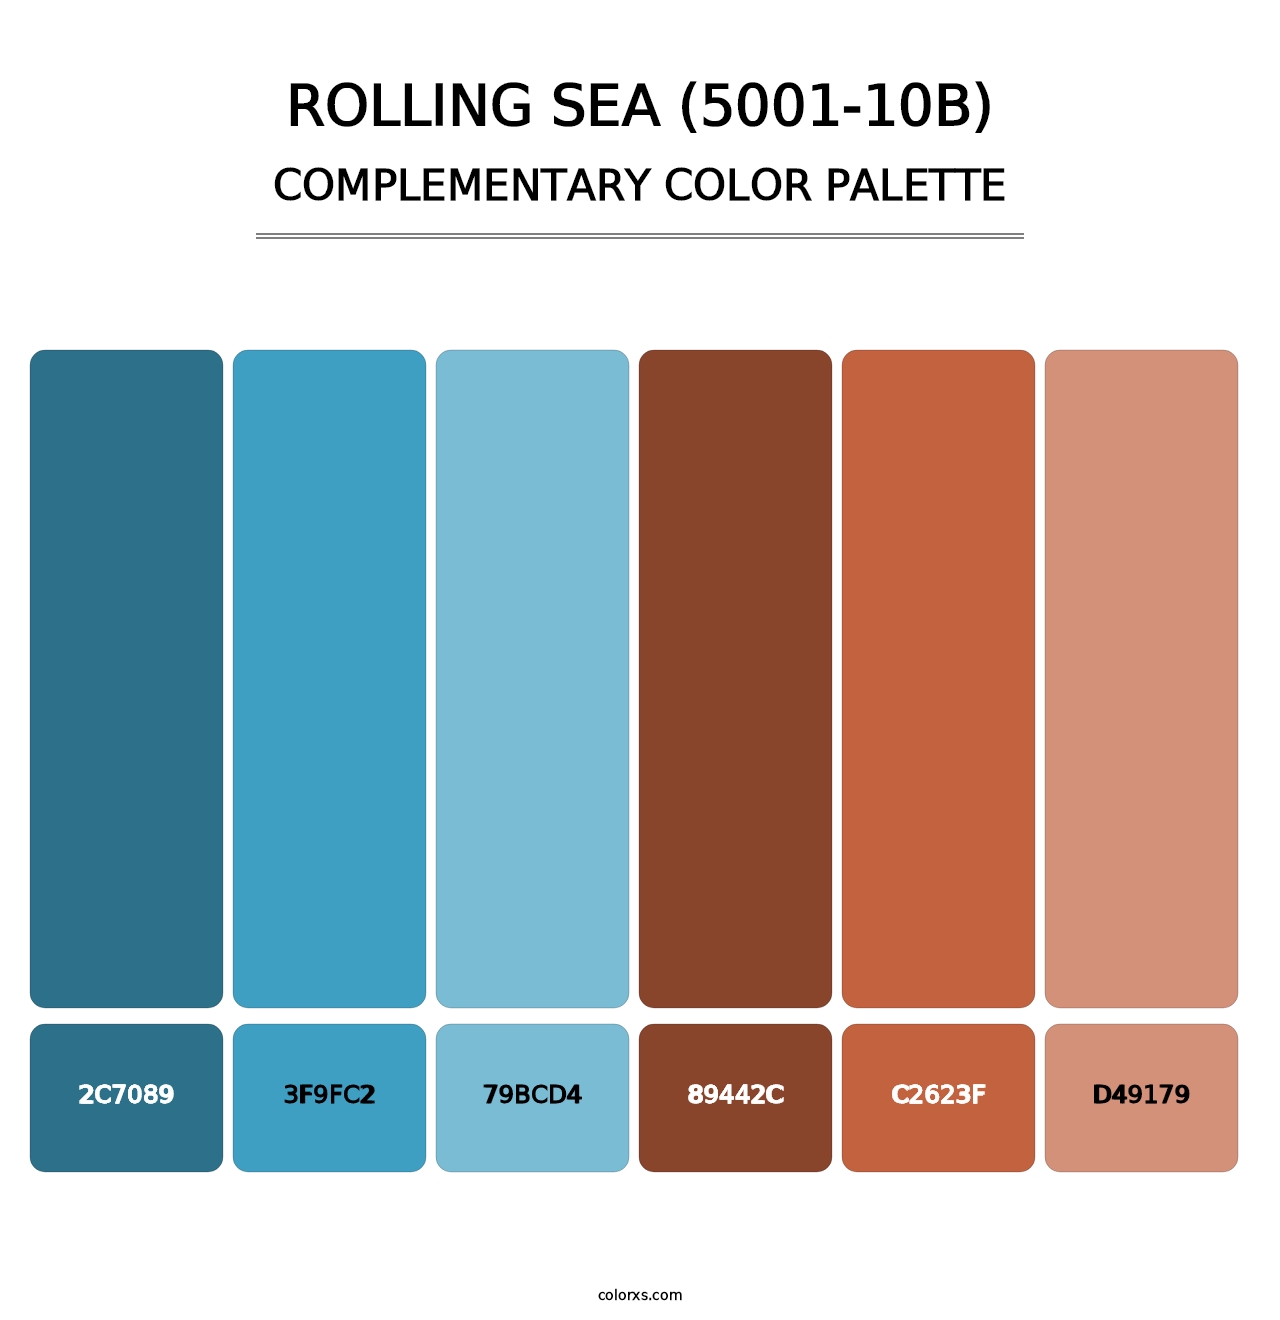 Rolling Sea (5001-10B) - Complementary Color Palette